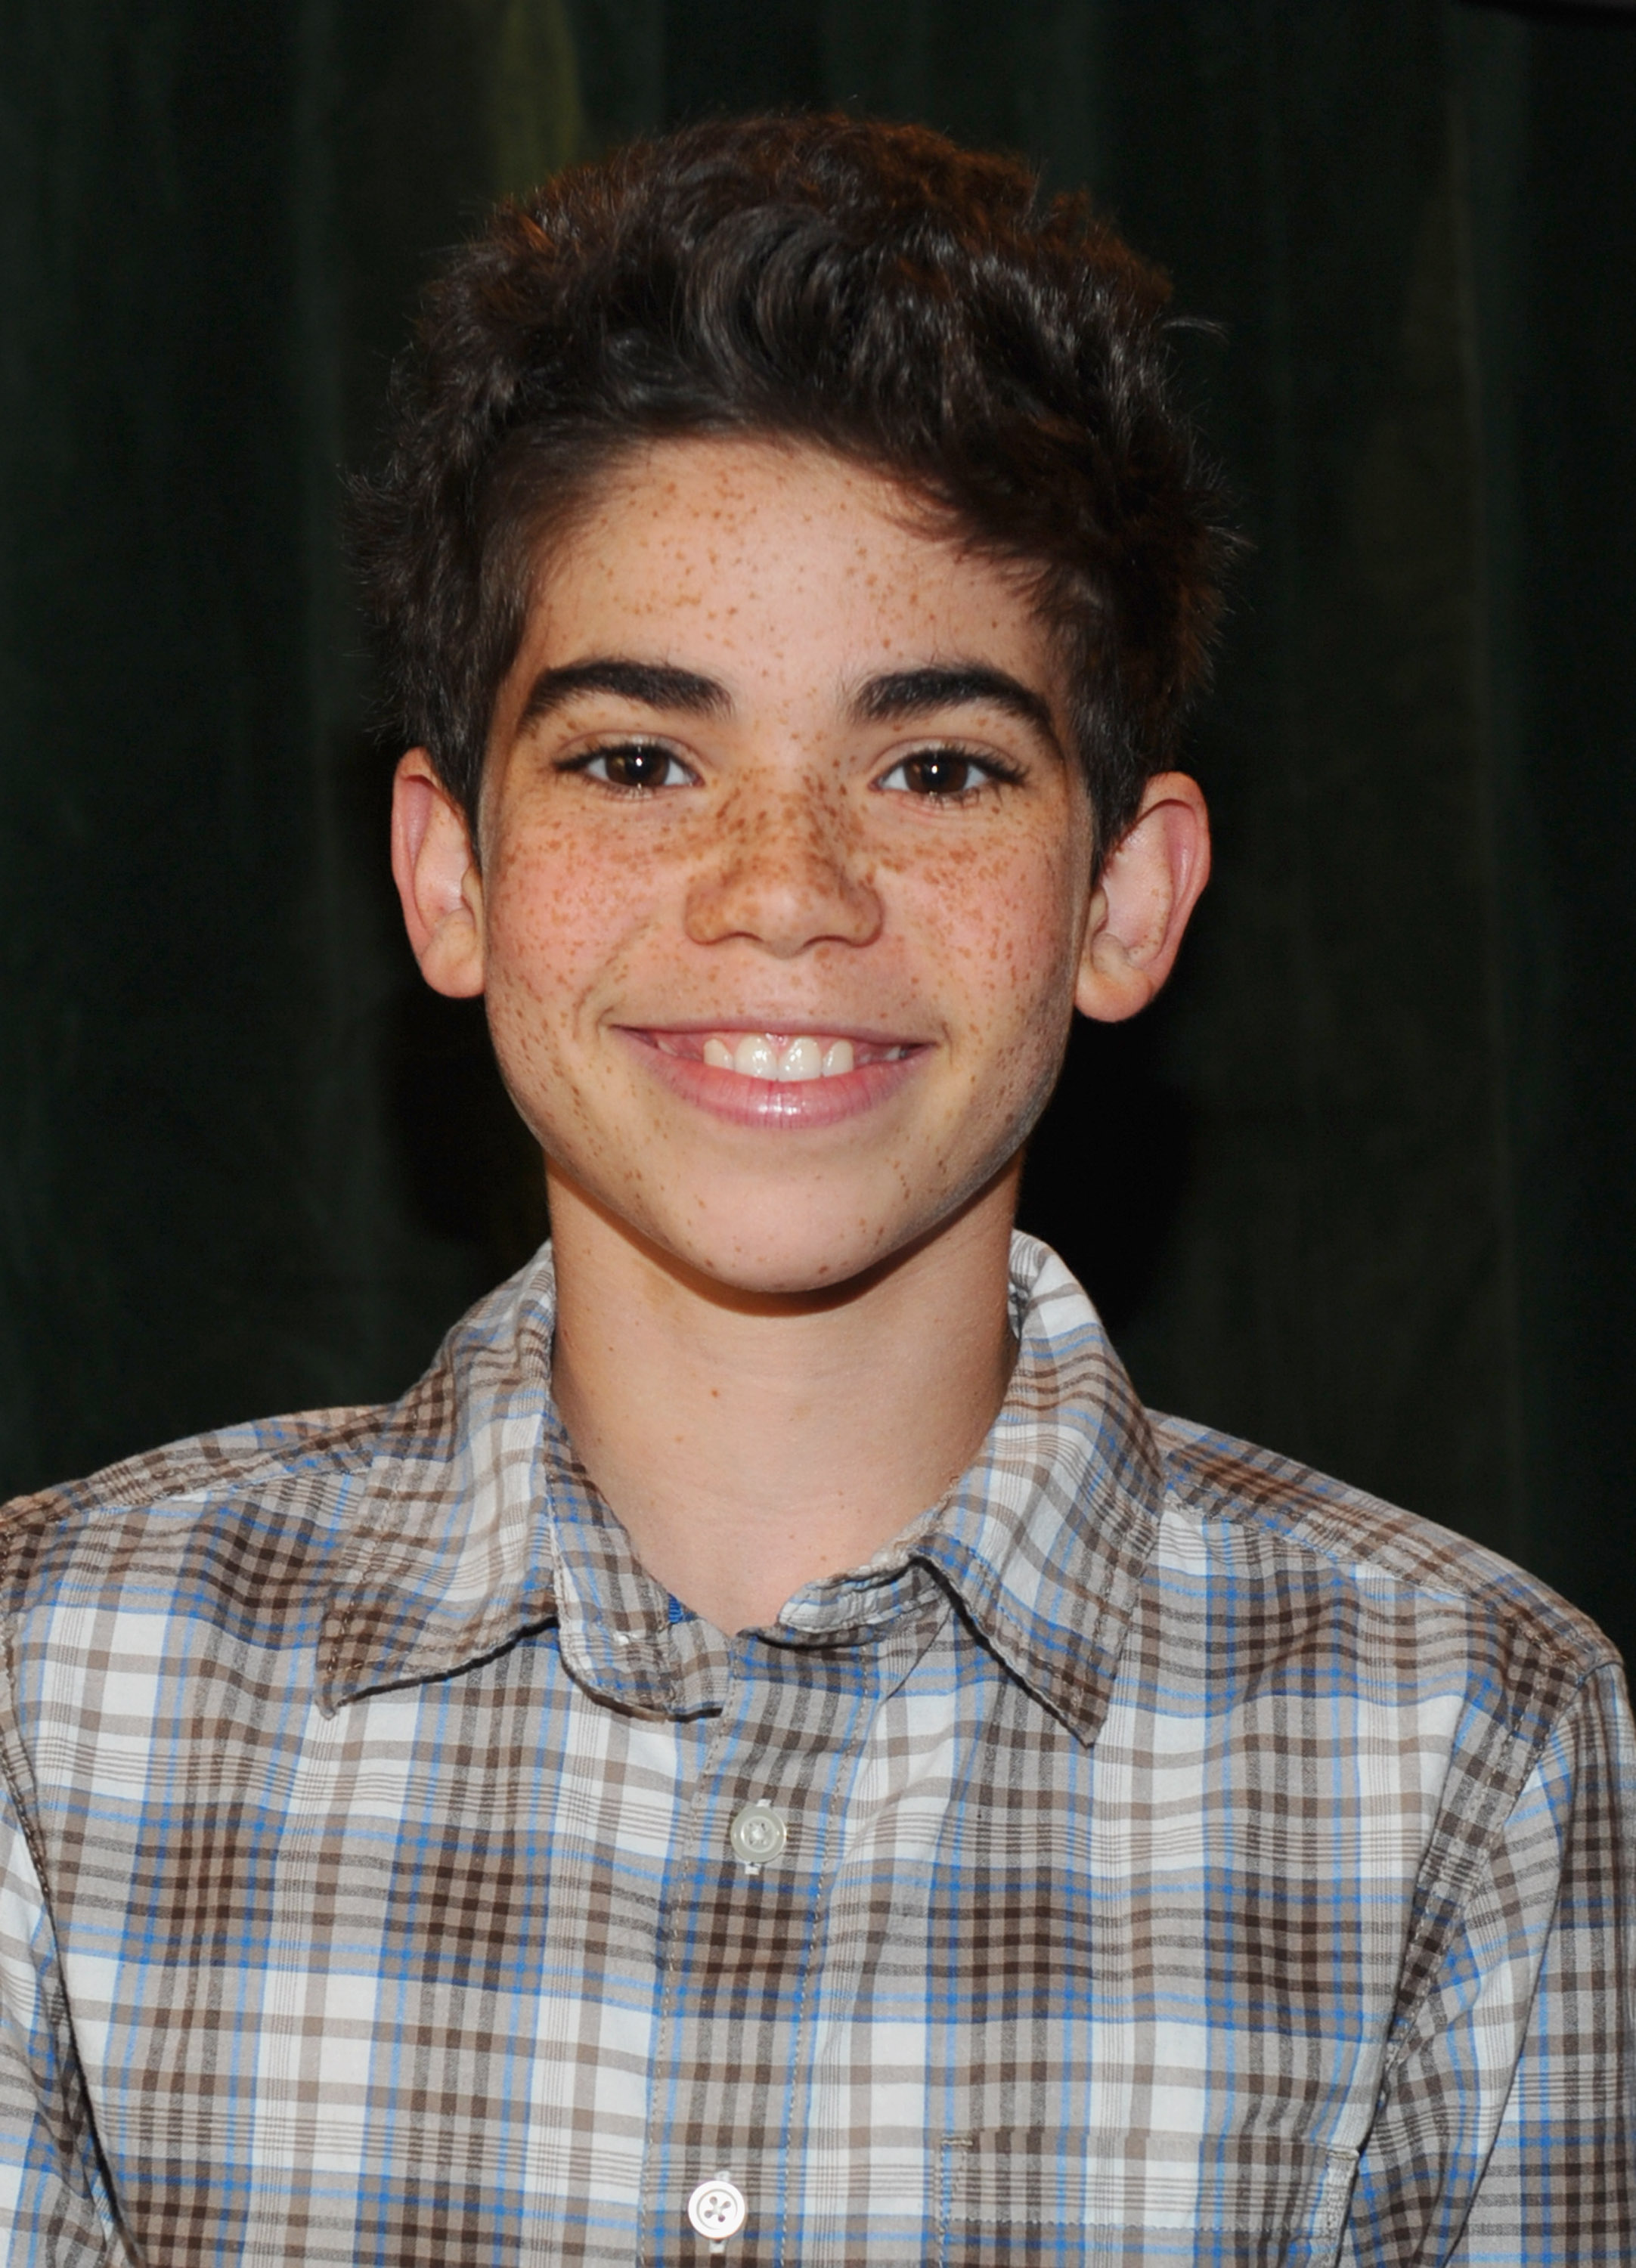 Cameron Boyce attends a screening of "Chimpanzee" on April 15, 2012 in Hollywood, California | Source: Getty Images